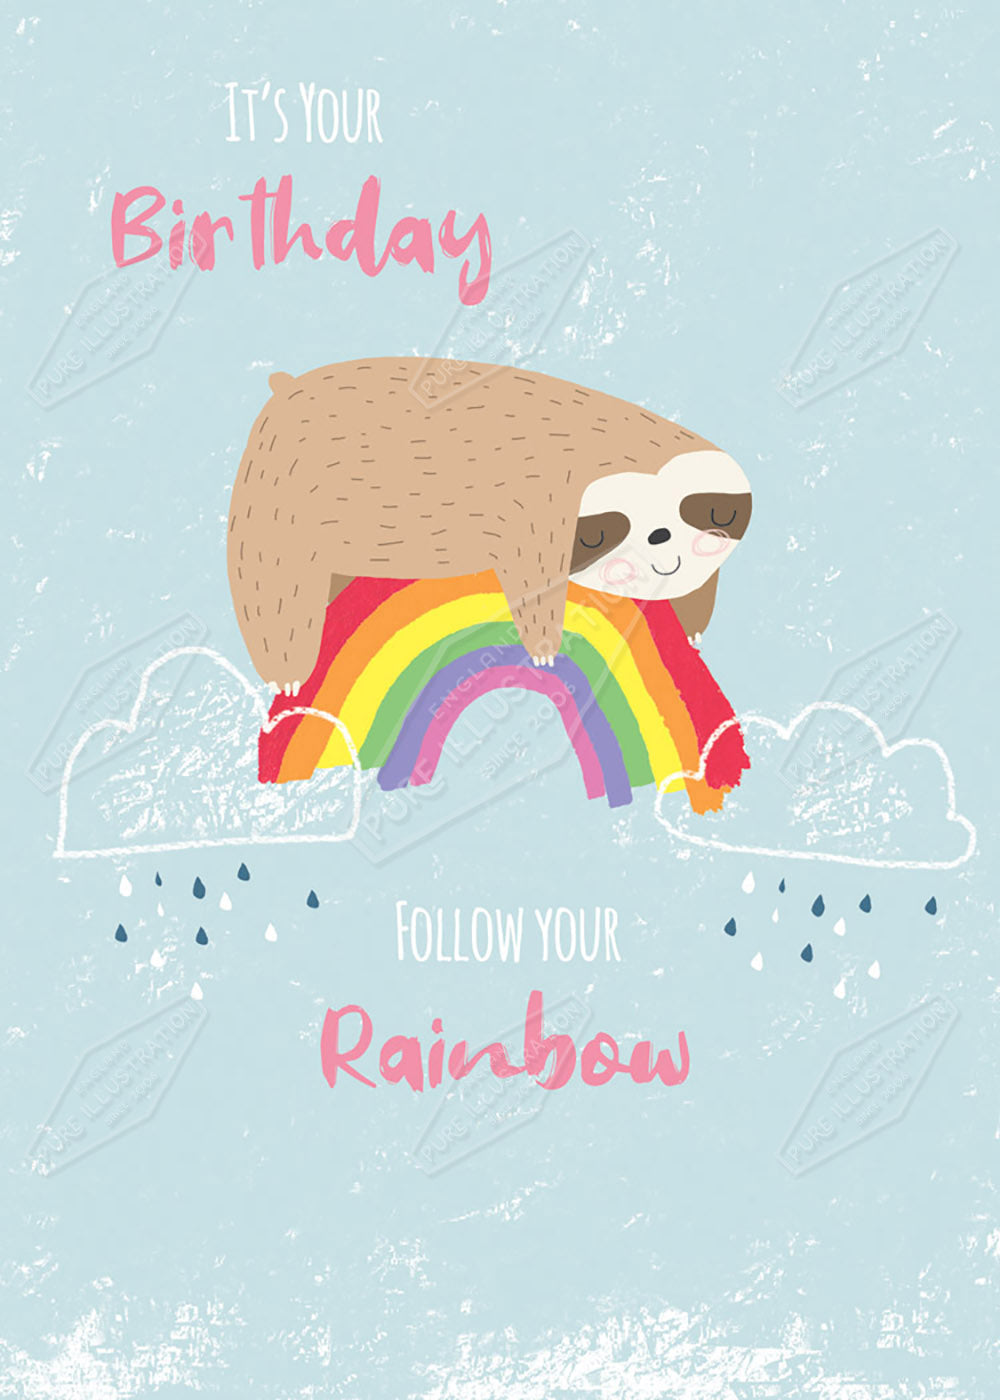 Birthday Sloth by Cory Reid for Pure Art Licensing Agency & Surface Design Studio